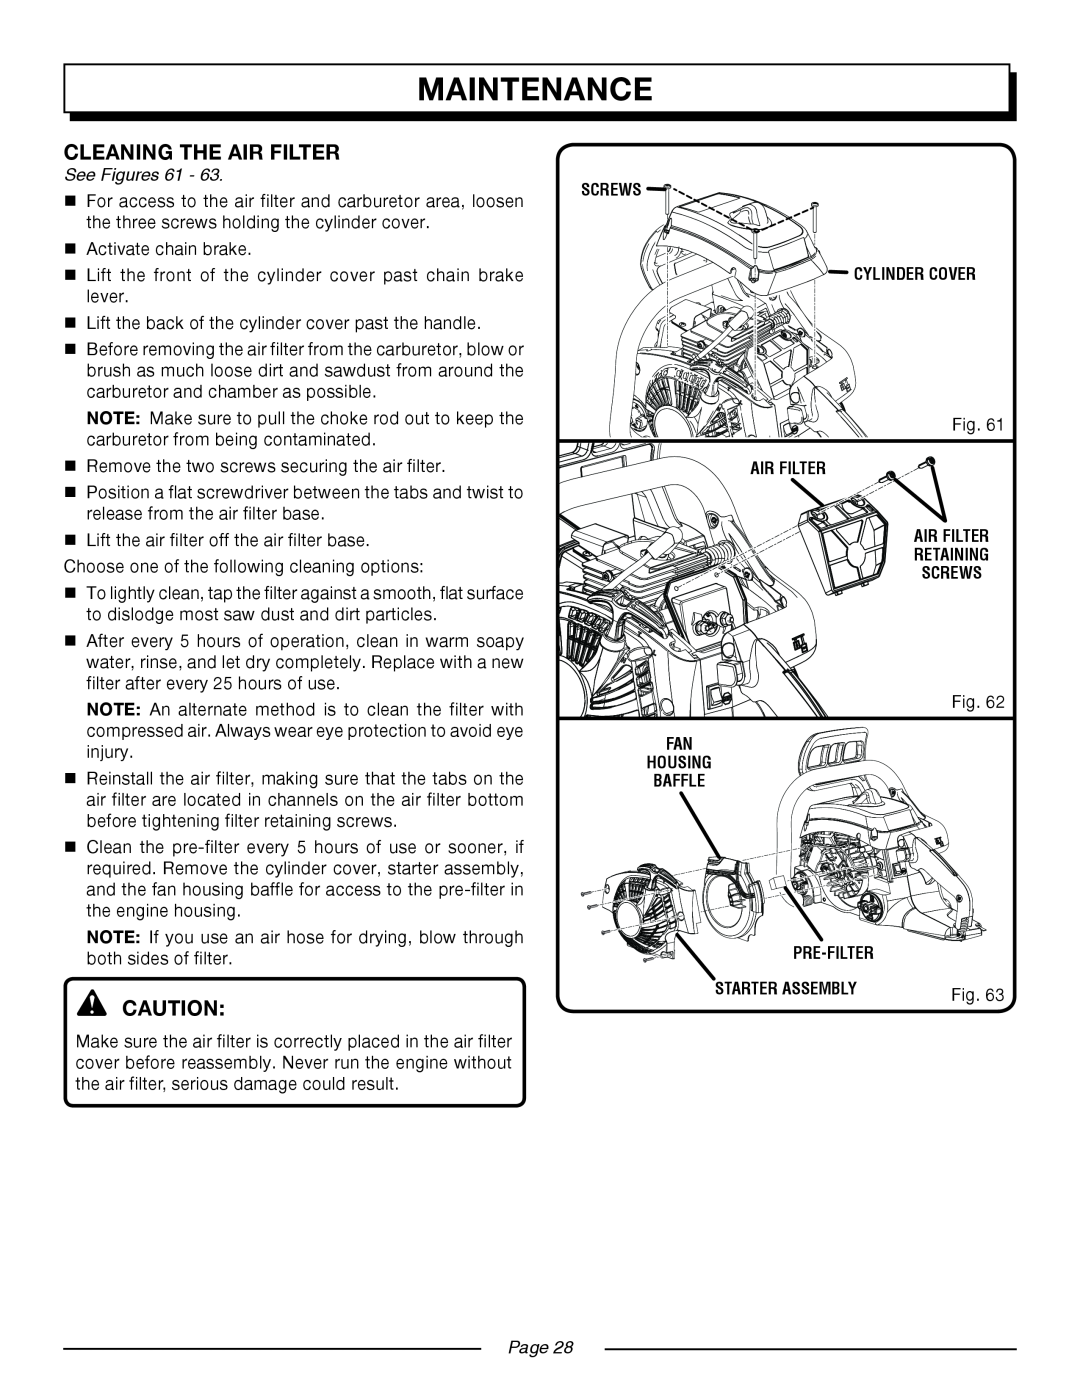 Homelite UT10552 maintenance, Cleaning The Air Filter, See Figures 61, screws cylinder cover, fan housing baffle, Page 